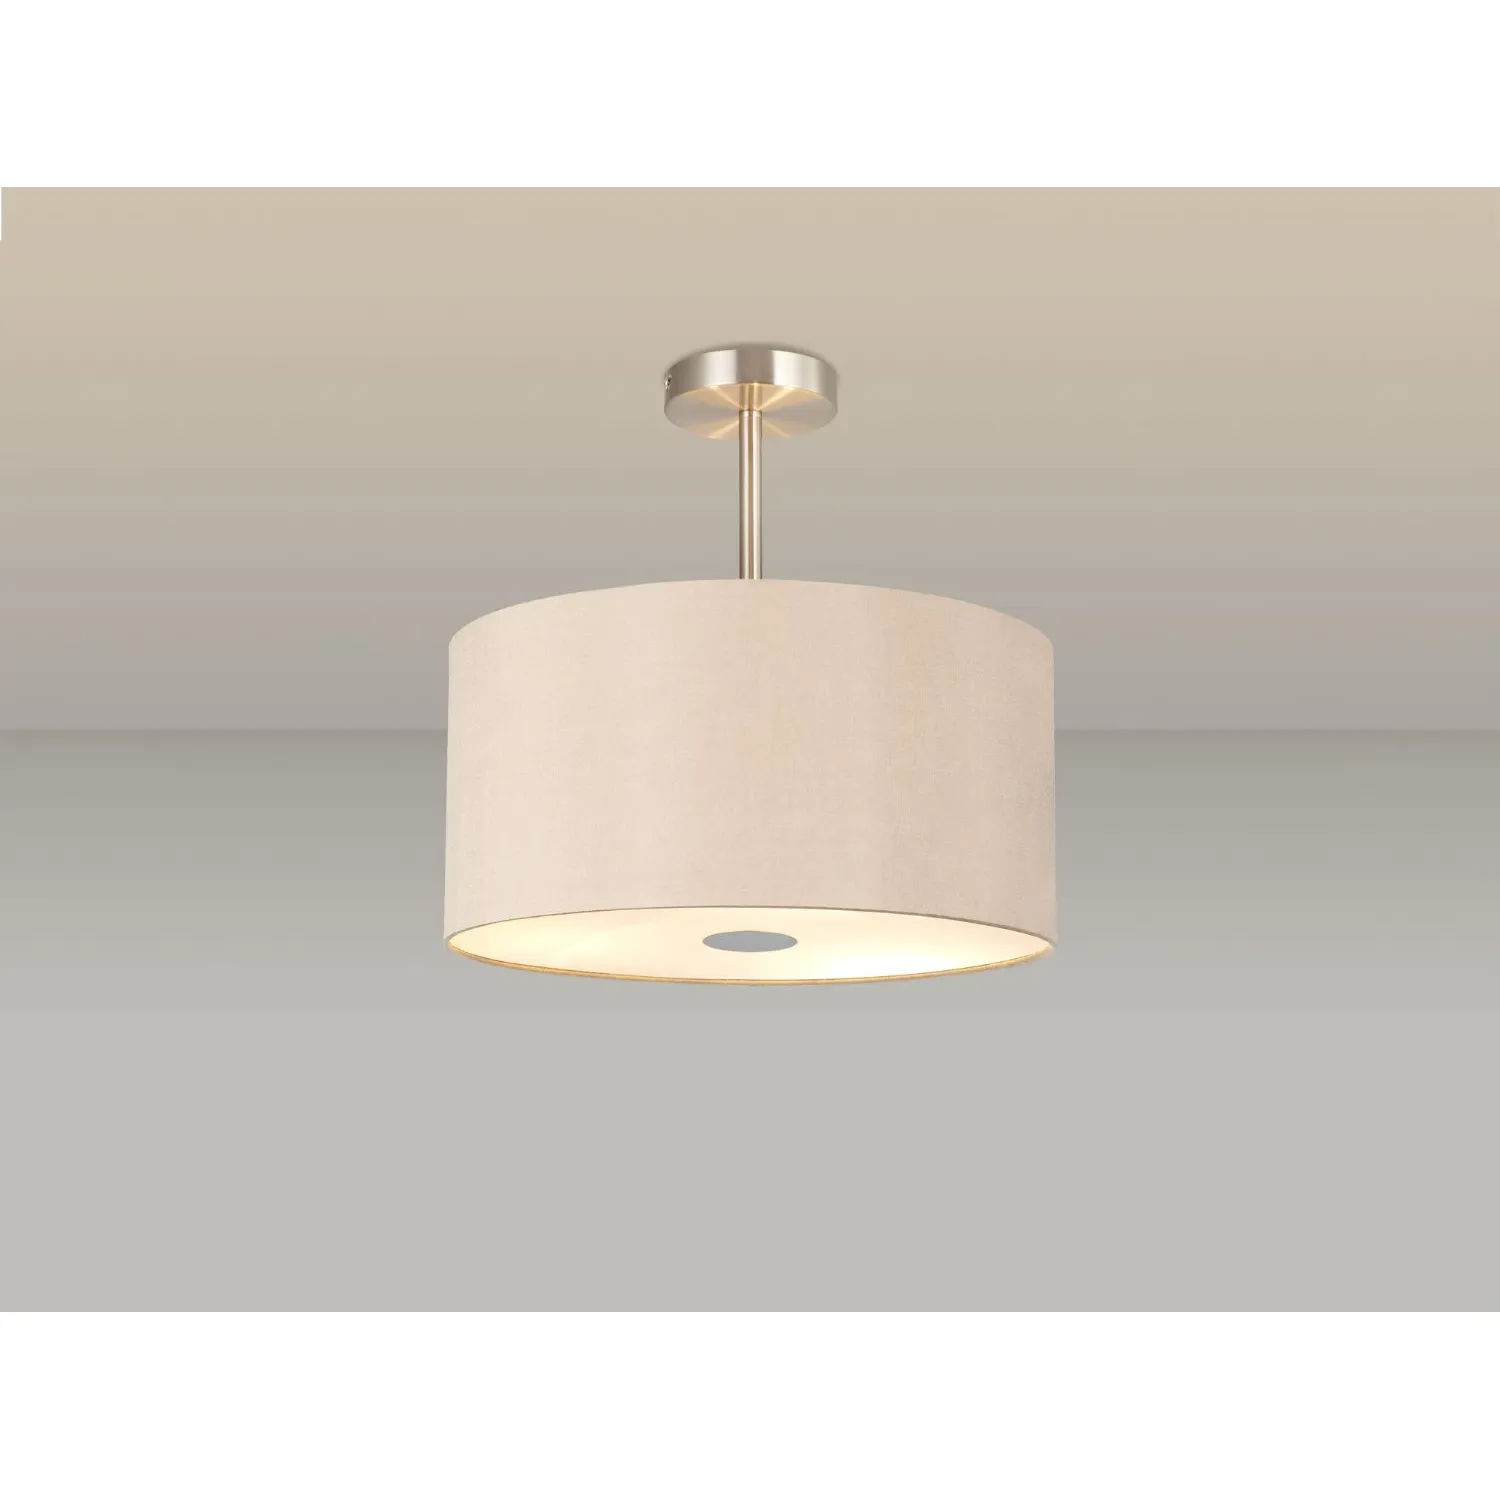 Baymont Satin Nickel 3 Light E27 Semi Flush c w 400 Dual Faux Silk Fabric Shade, Antique Gold Ruby And 400mm Frosted PC Acrylic Diffuser